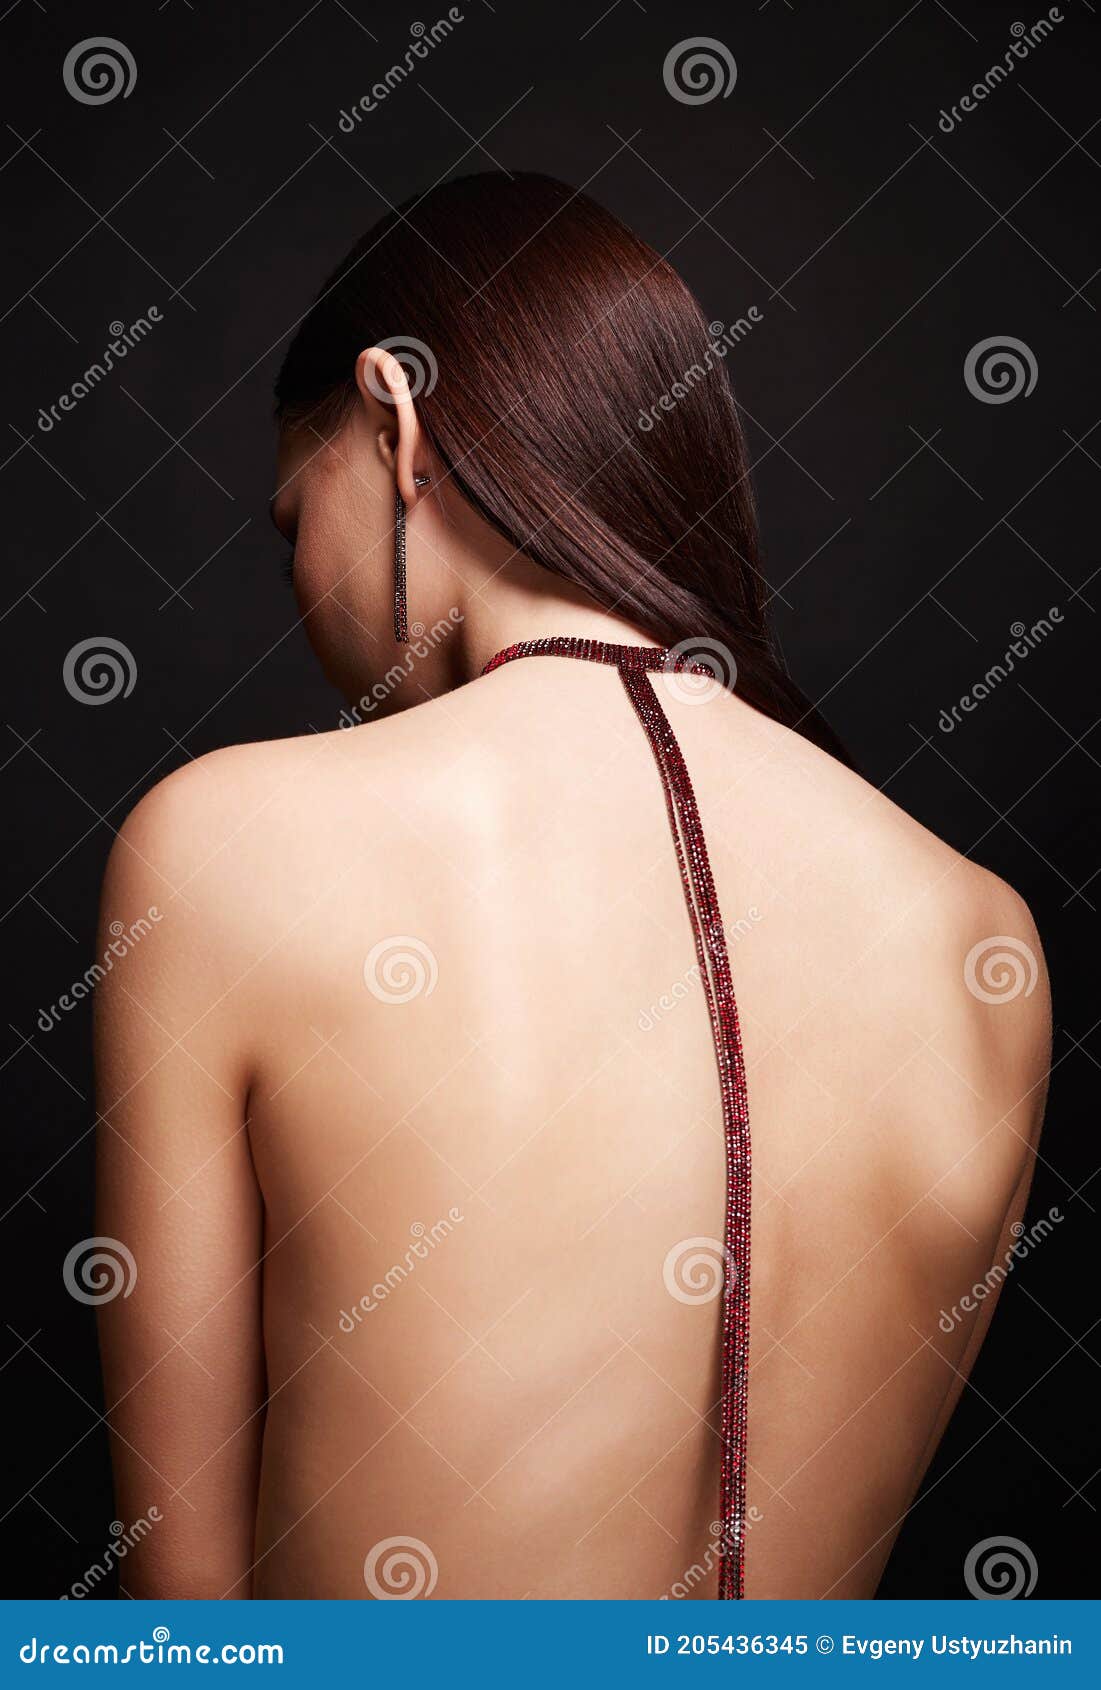 Black women naked in chains on pinterest 1 470 Naked Woman Necklace Photos Free Royalty Free Stock Photos From Dreamstime